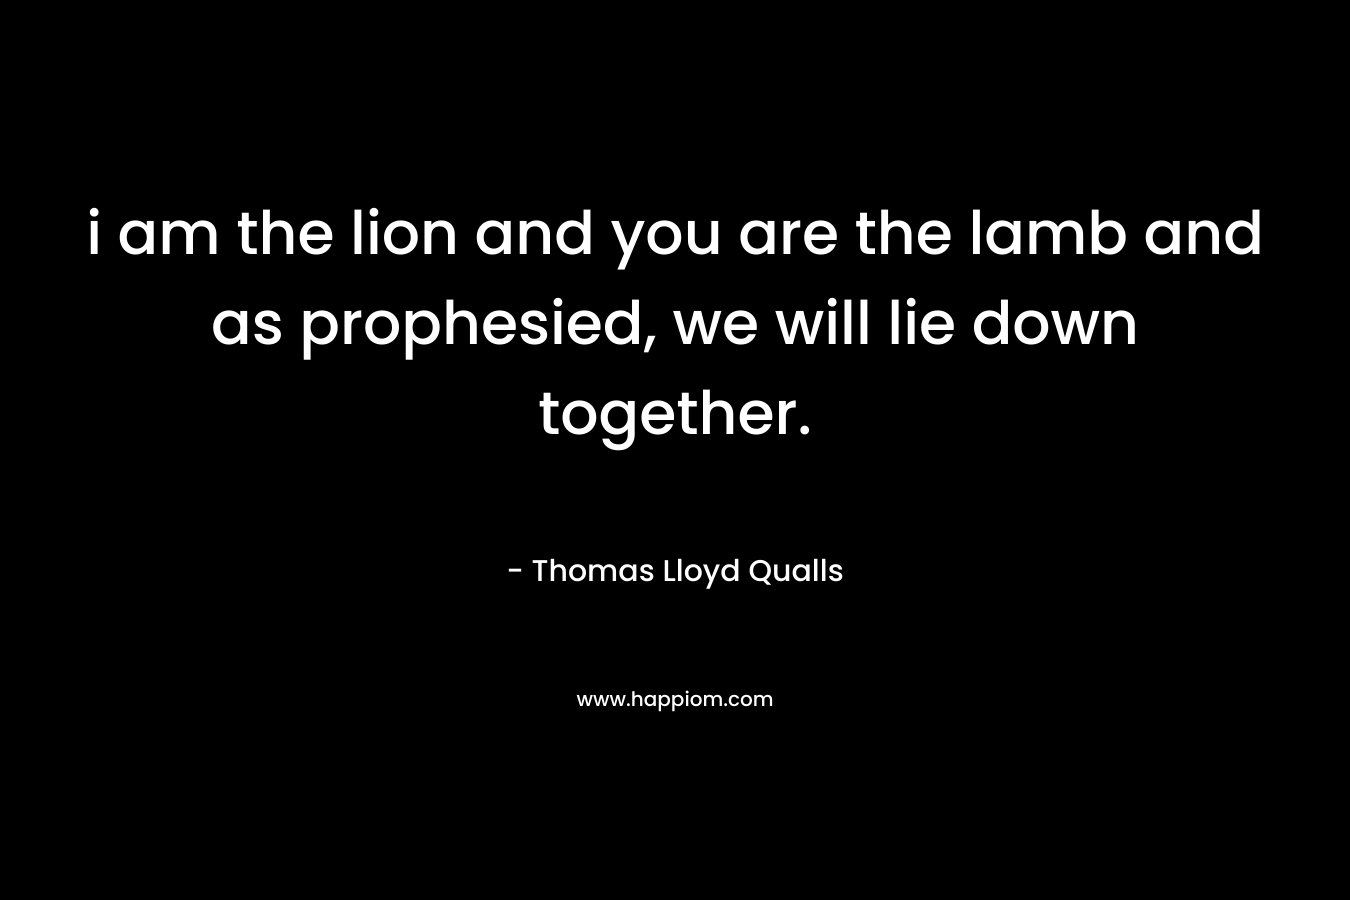 i am the lion and you are the lamb and as prophesied, we will lie down together.